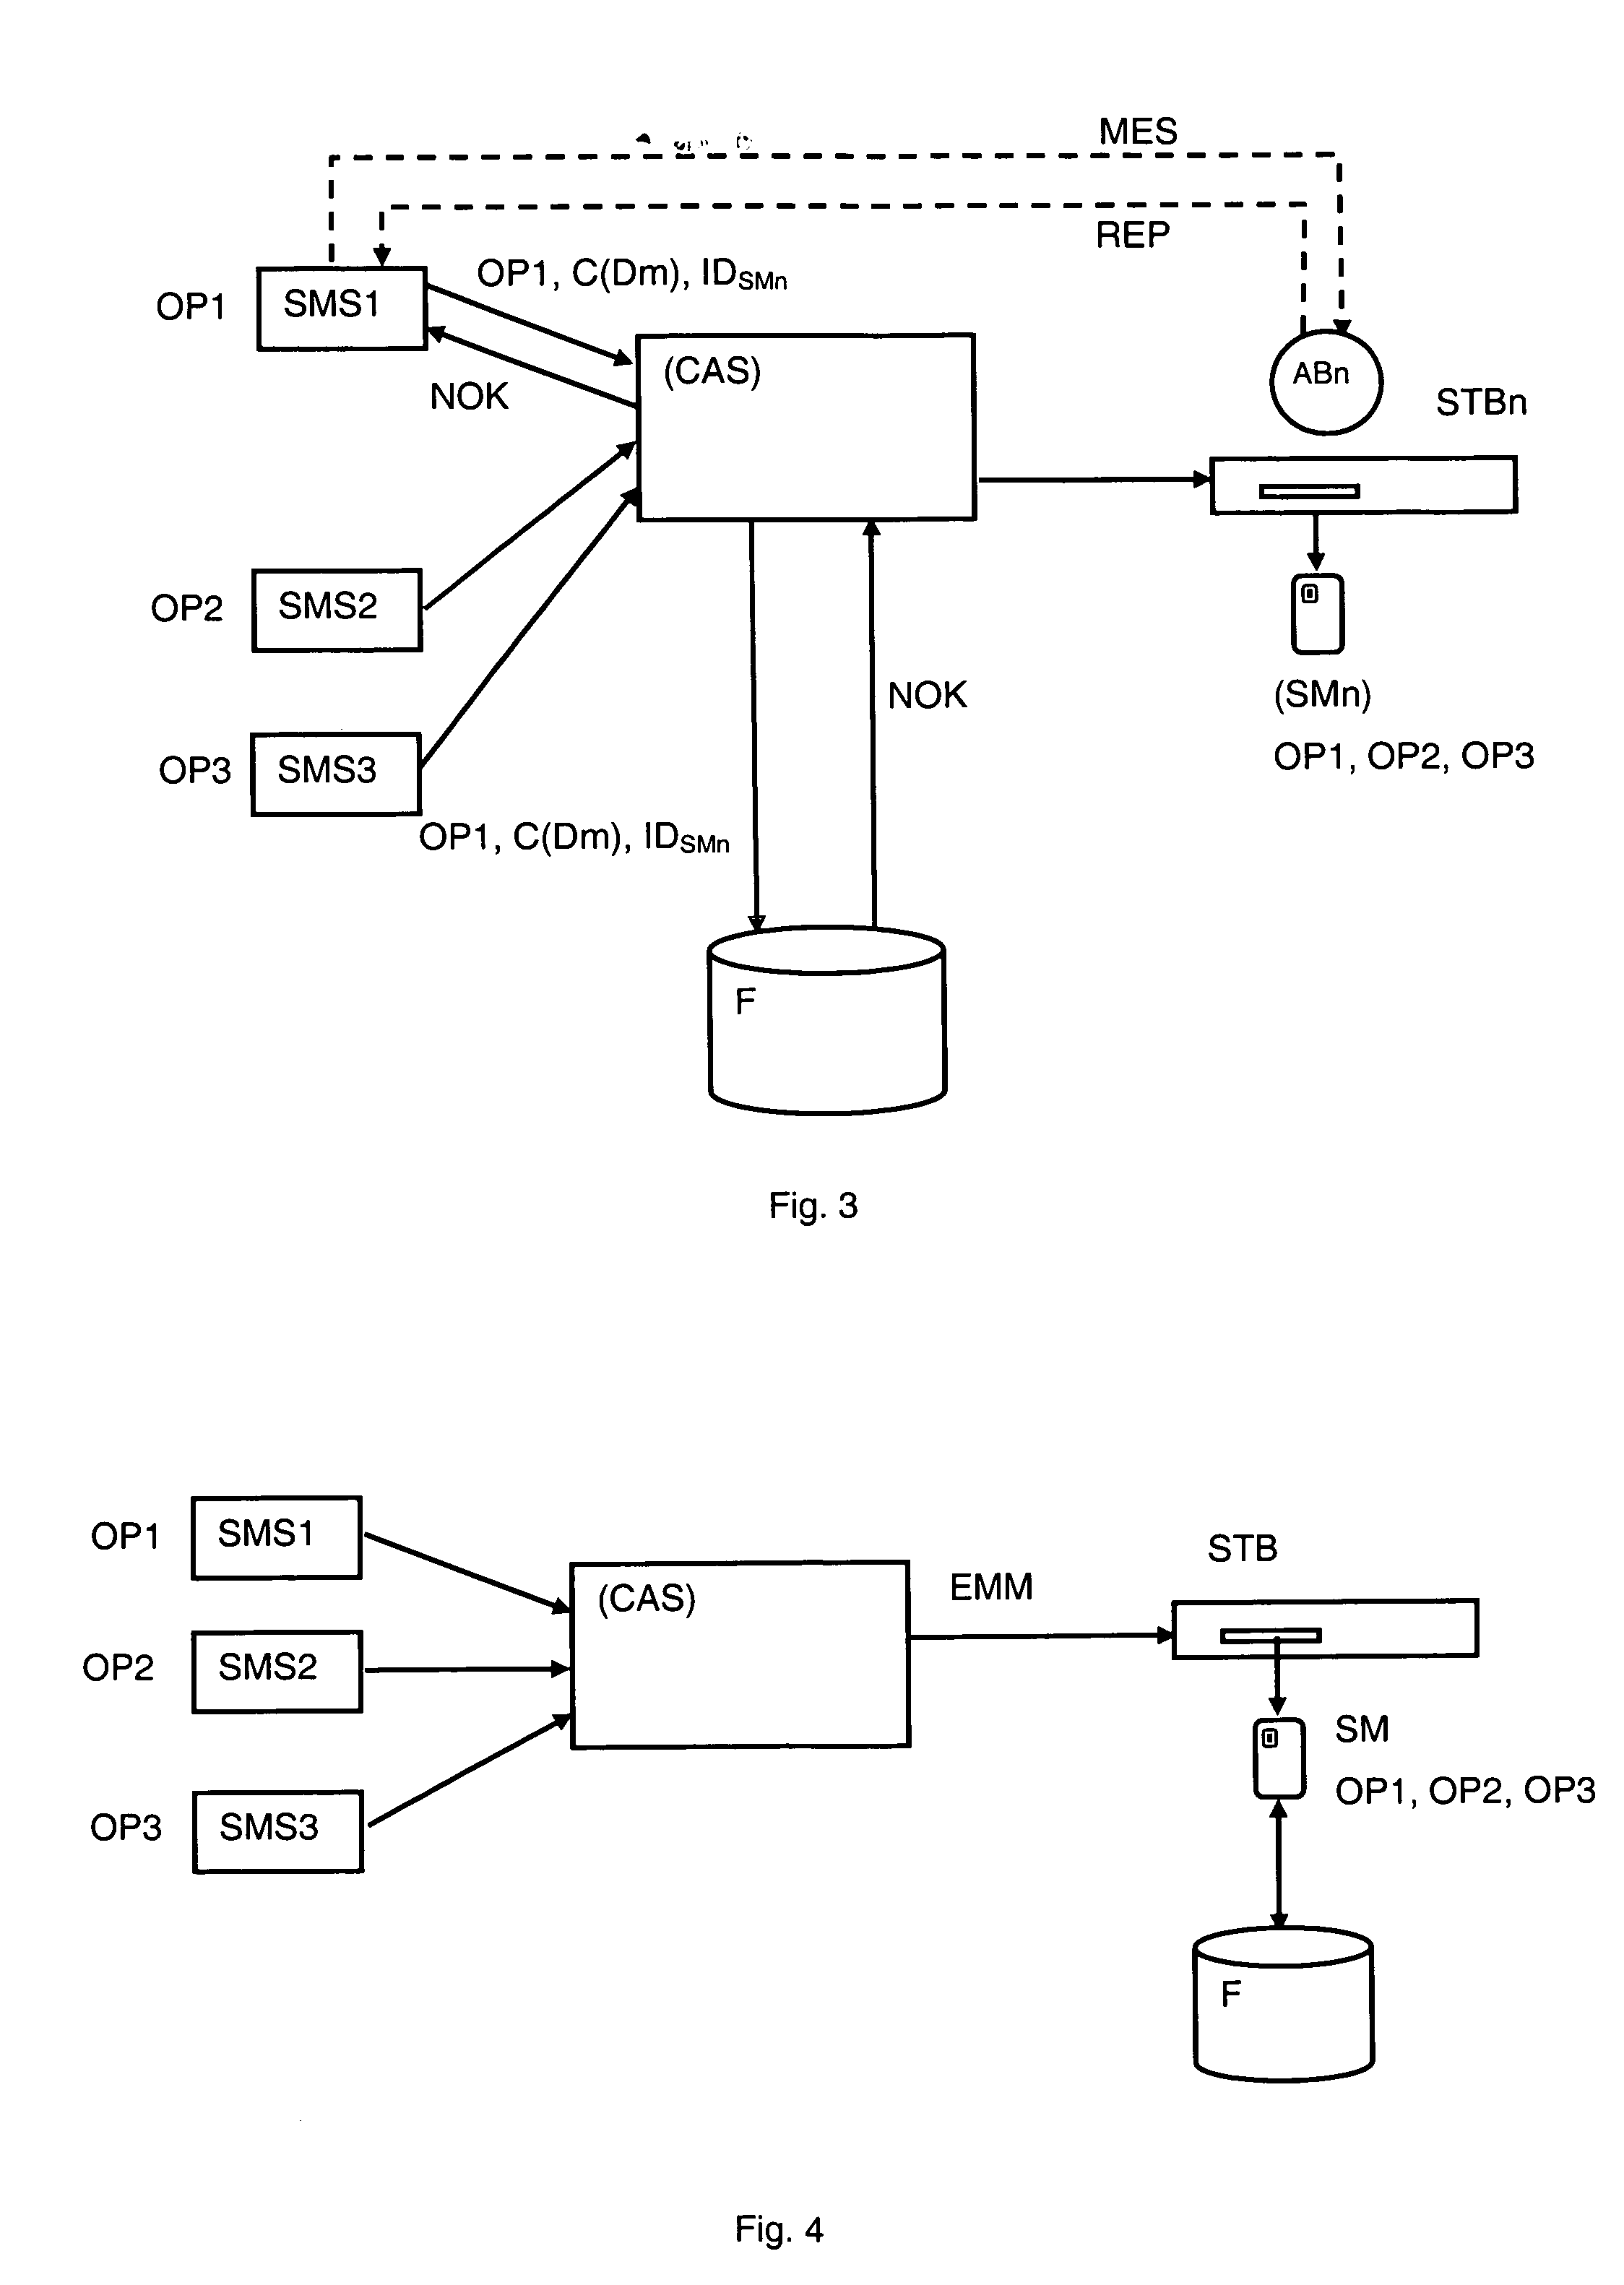 Method for managing rights of subscribers to a multi-operator pay-television system